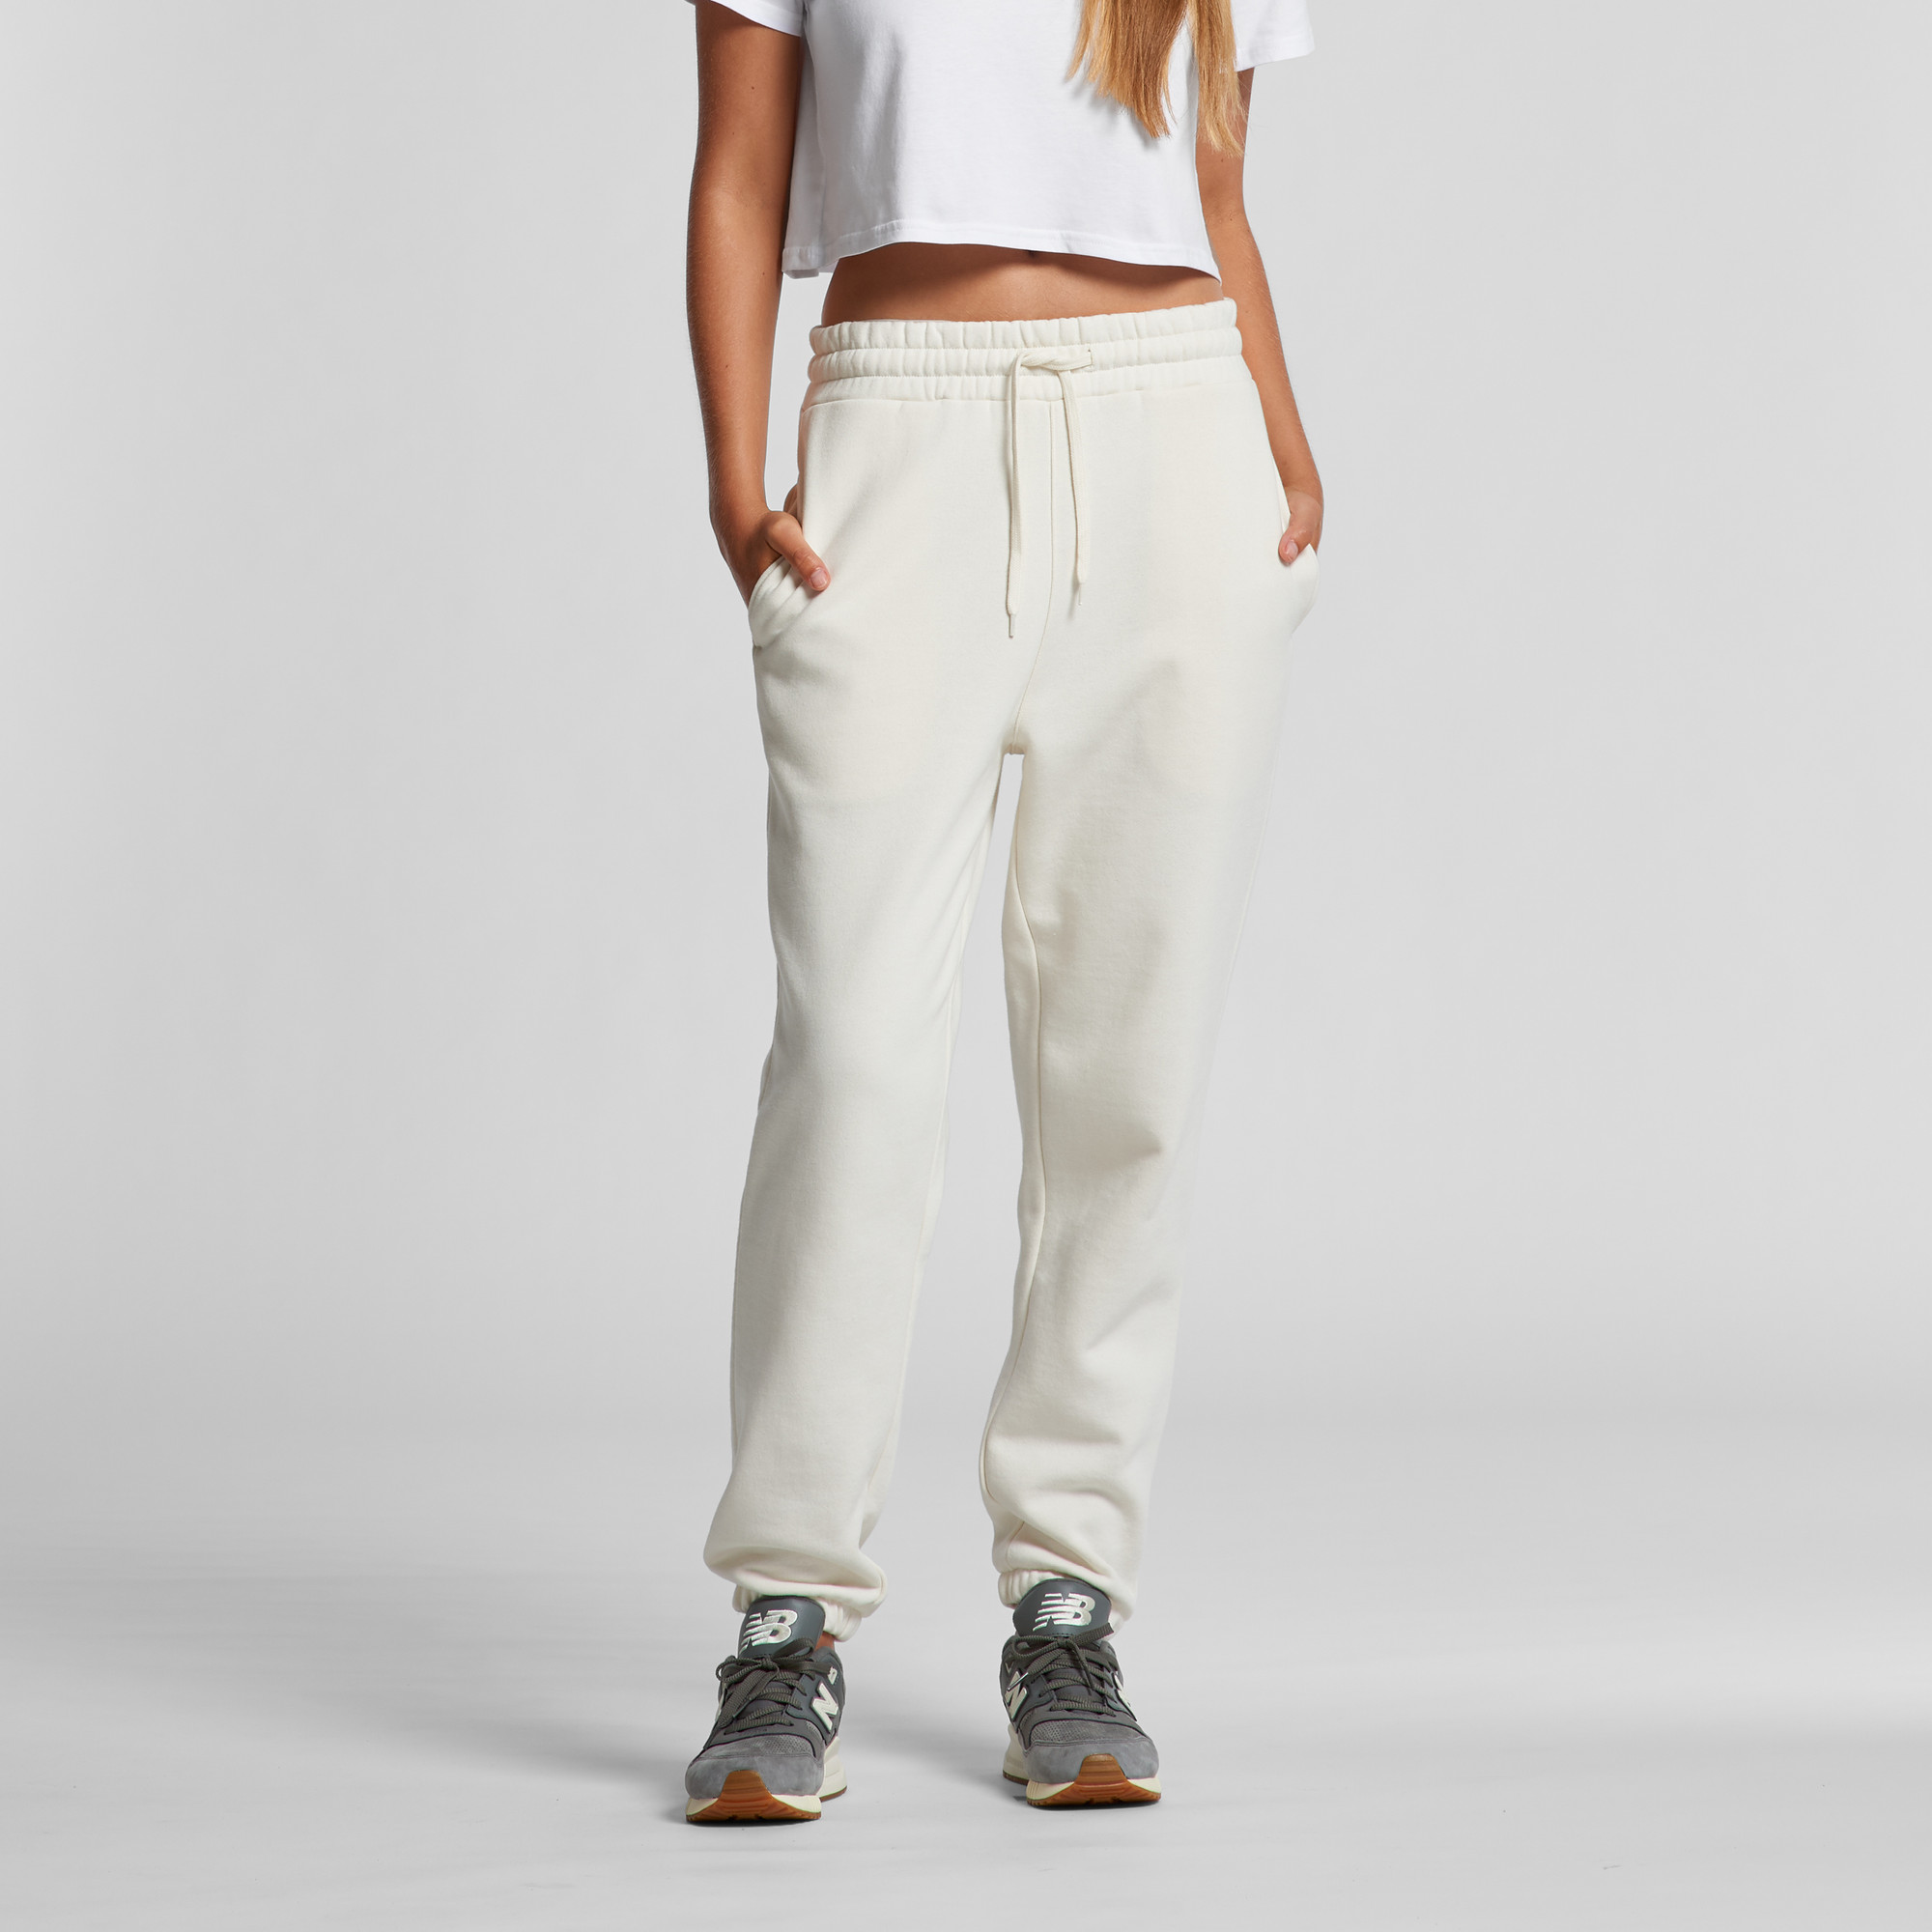 4921_WOS_STENCIL_TRACK_PANTS_LOOSE__01933